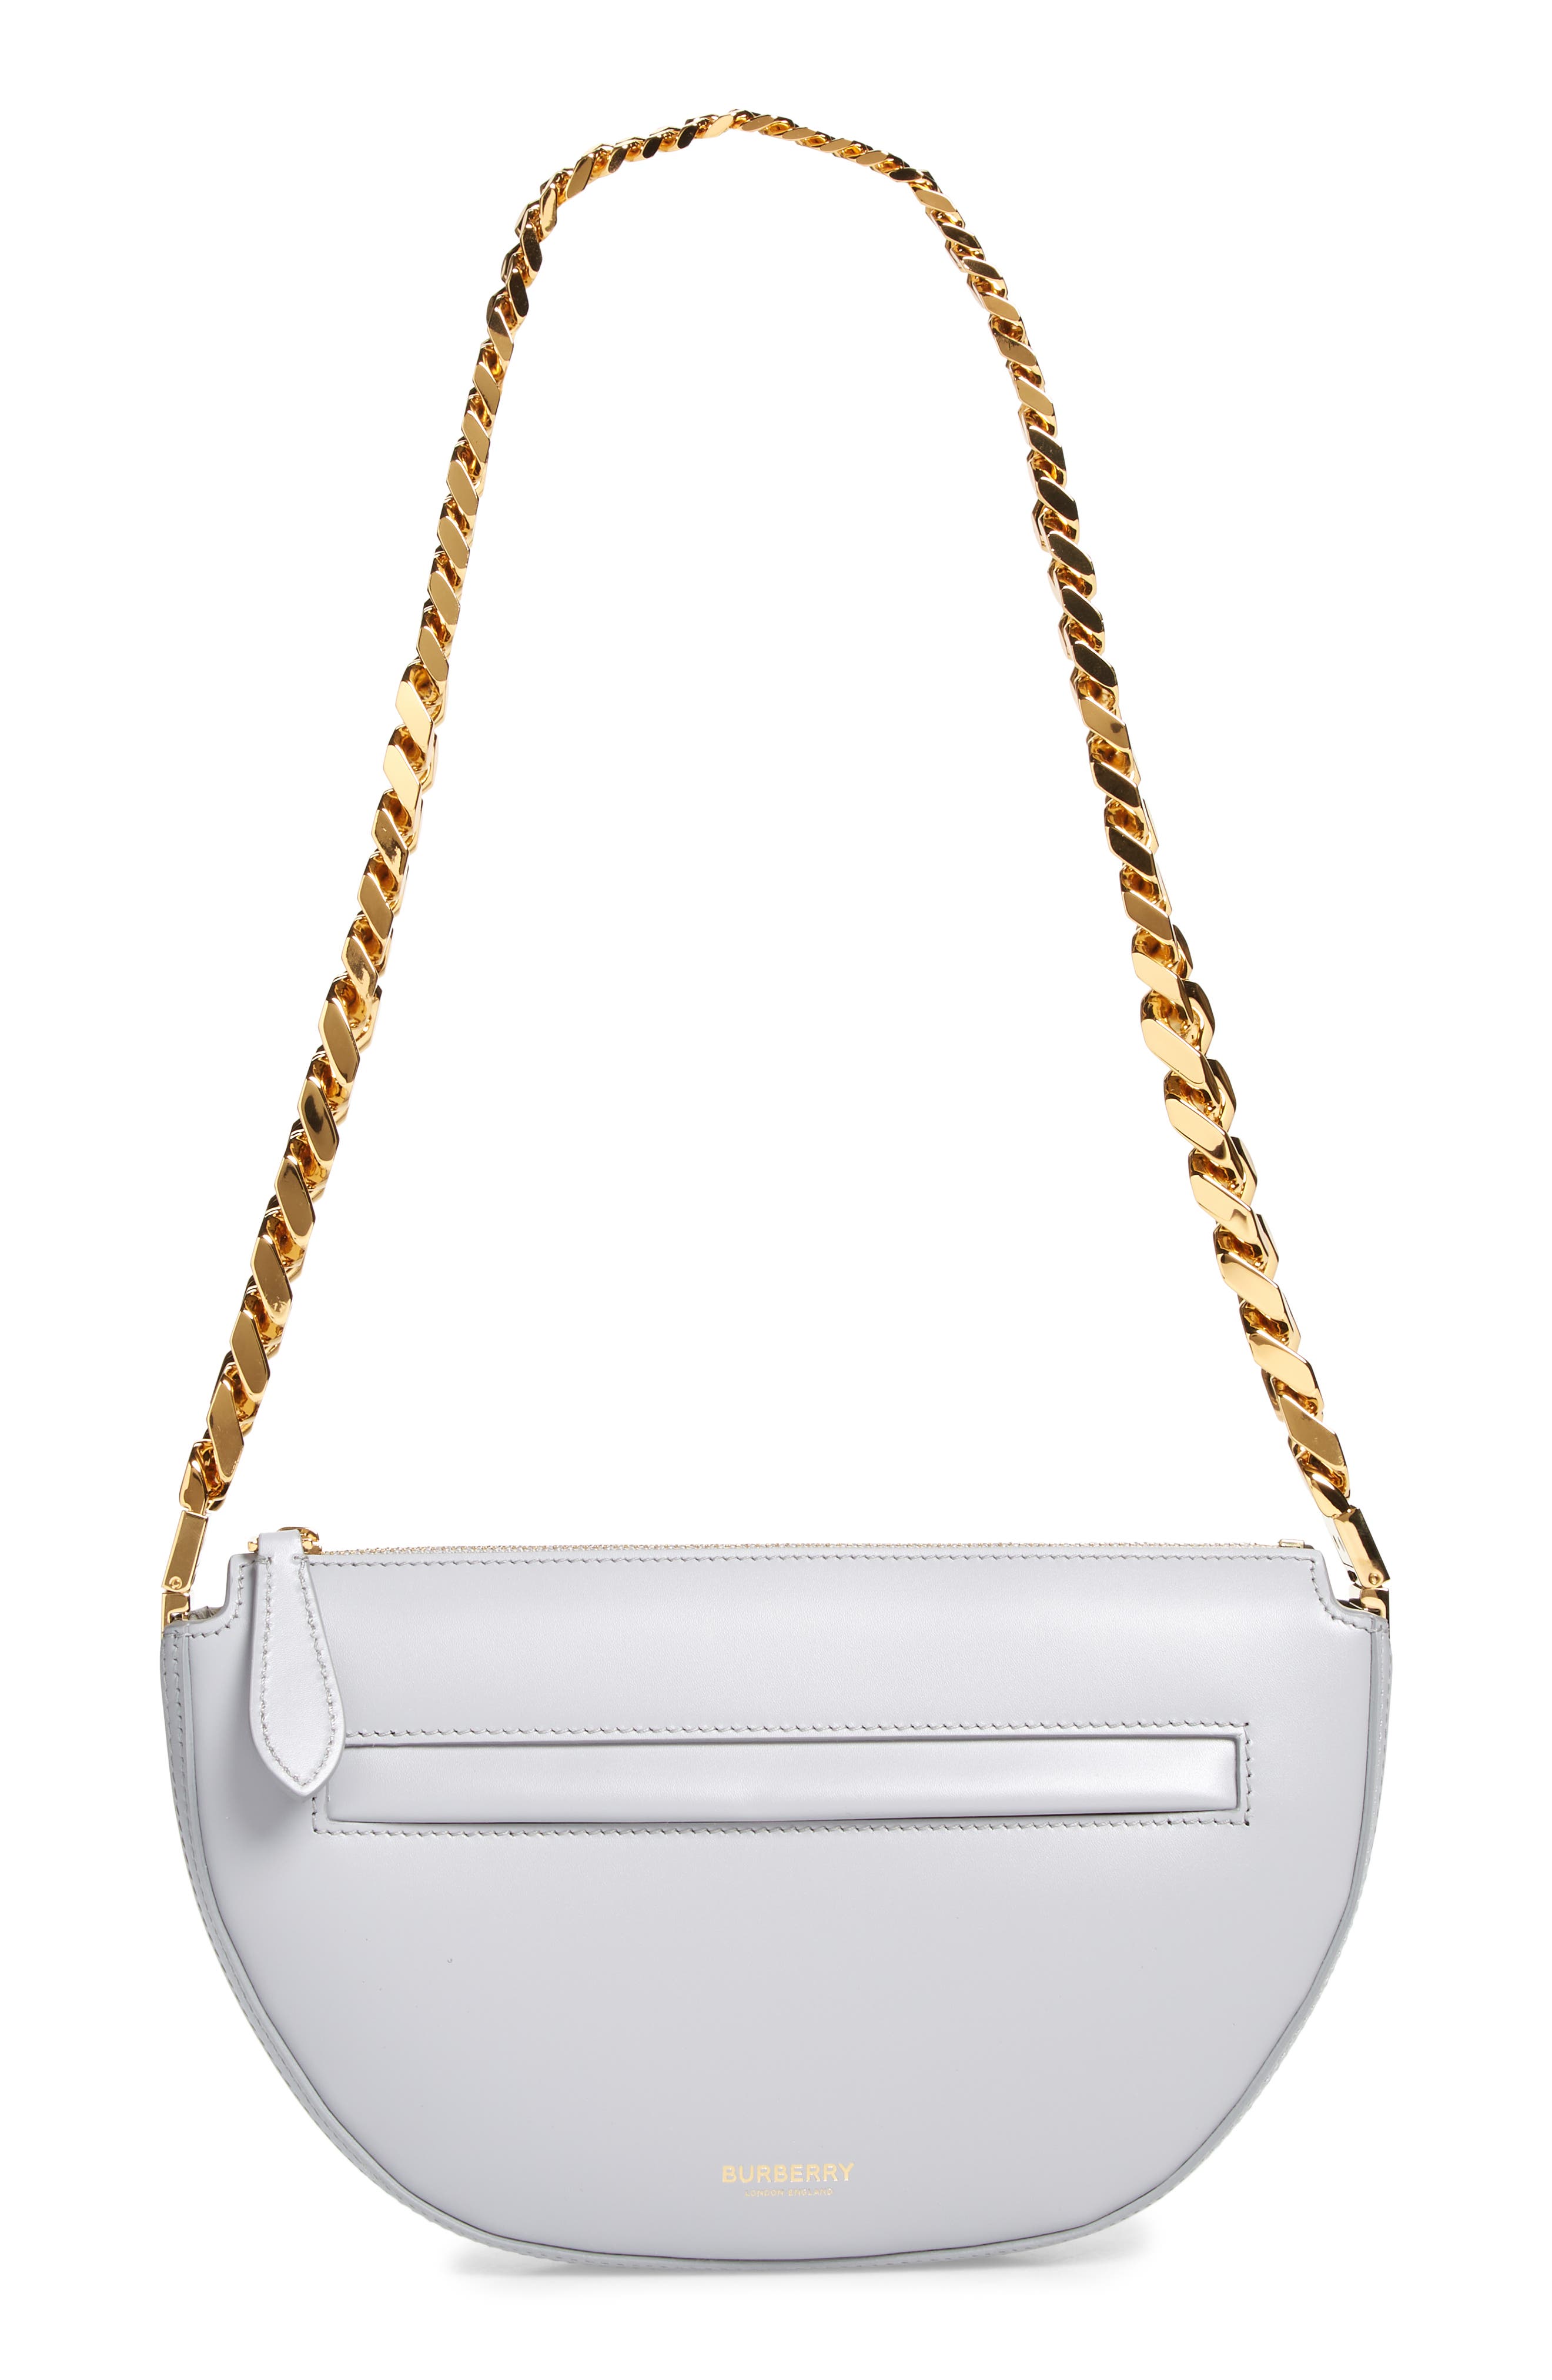 Burberry Mini Olympia Chain Leather Shoulder Bag in Heather Melange at Nordstrom